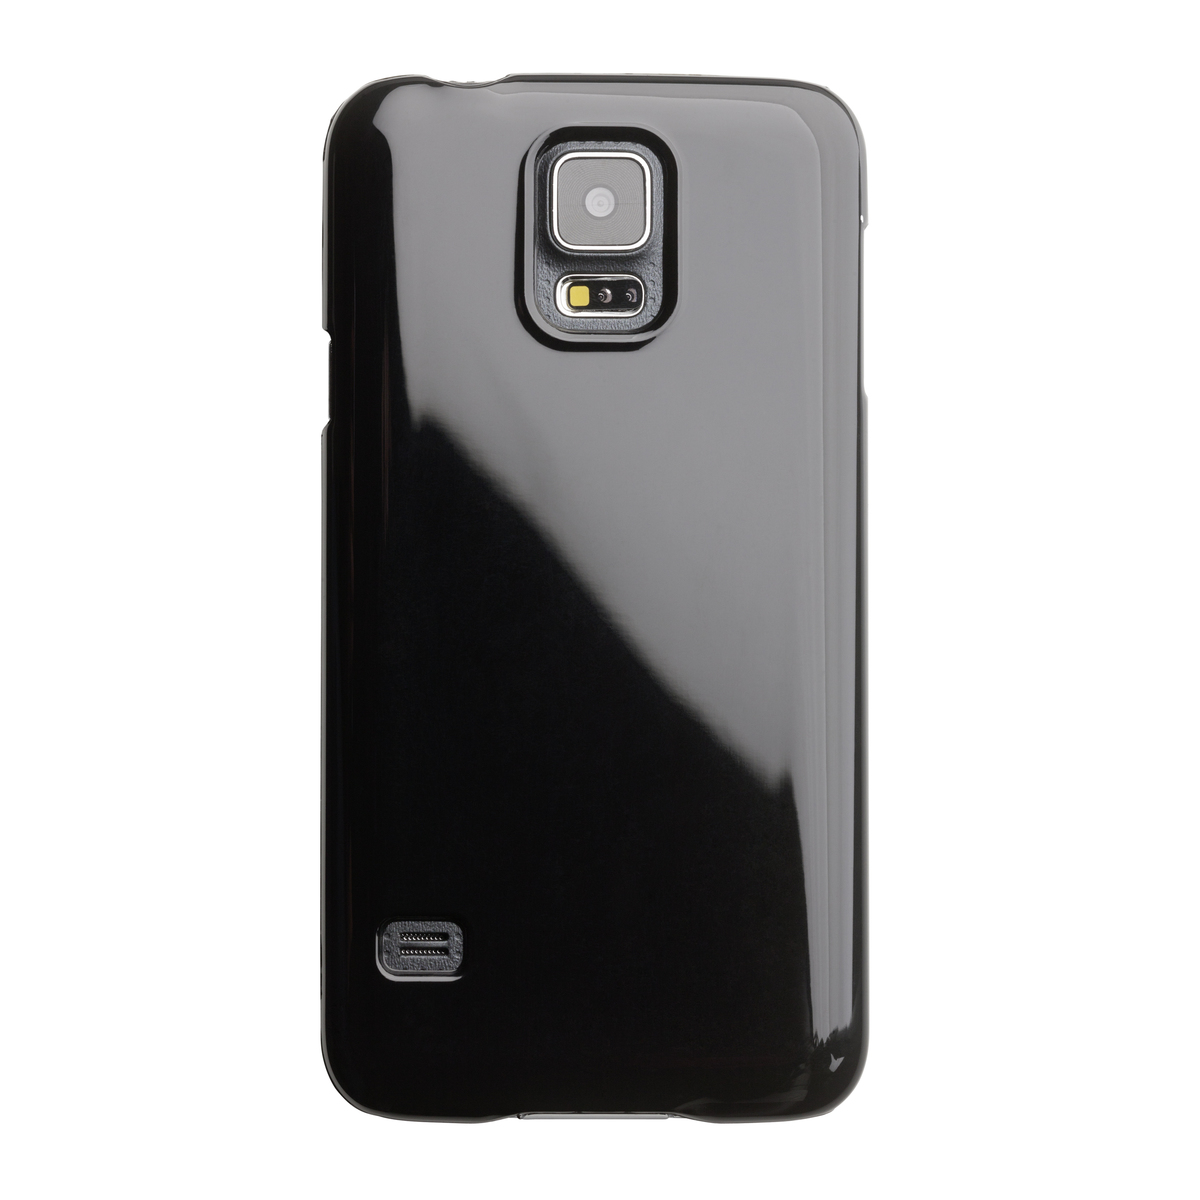 LM Smartphonecover REFLECTS-COVER IX Galaxy S5 BLACK schwarz